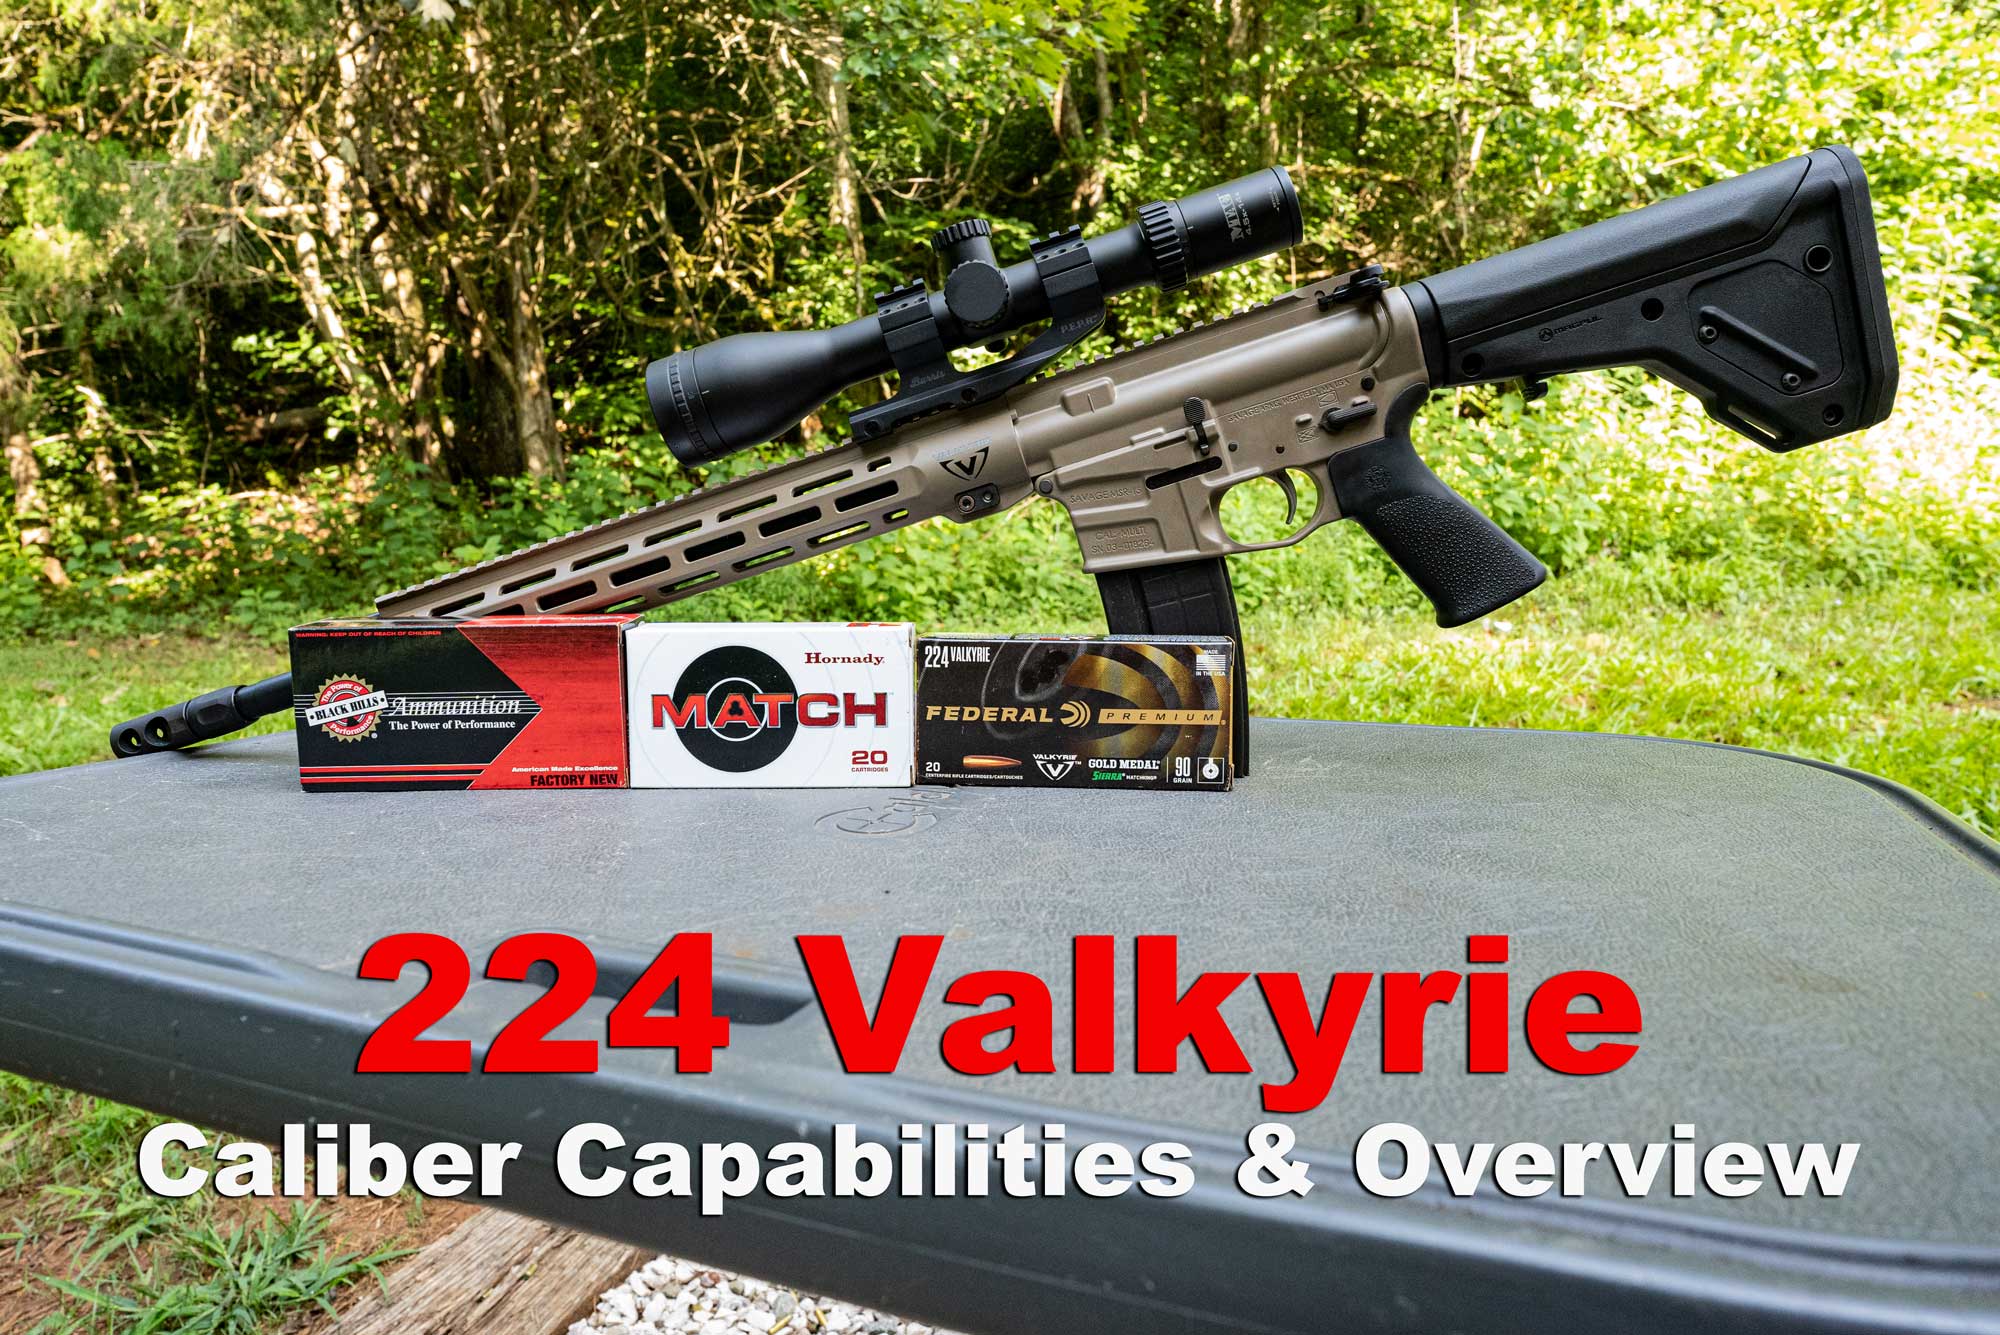 224 valkyrie rifle and ammunition on a shooting bench